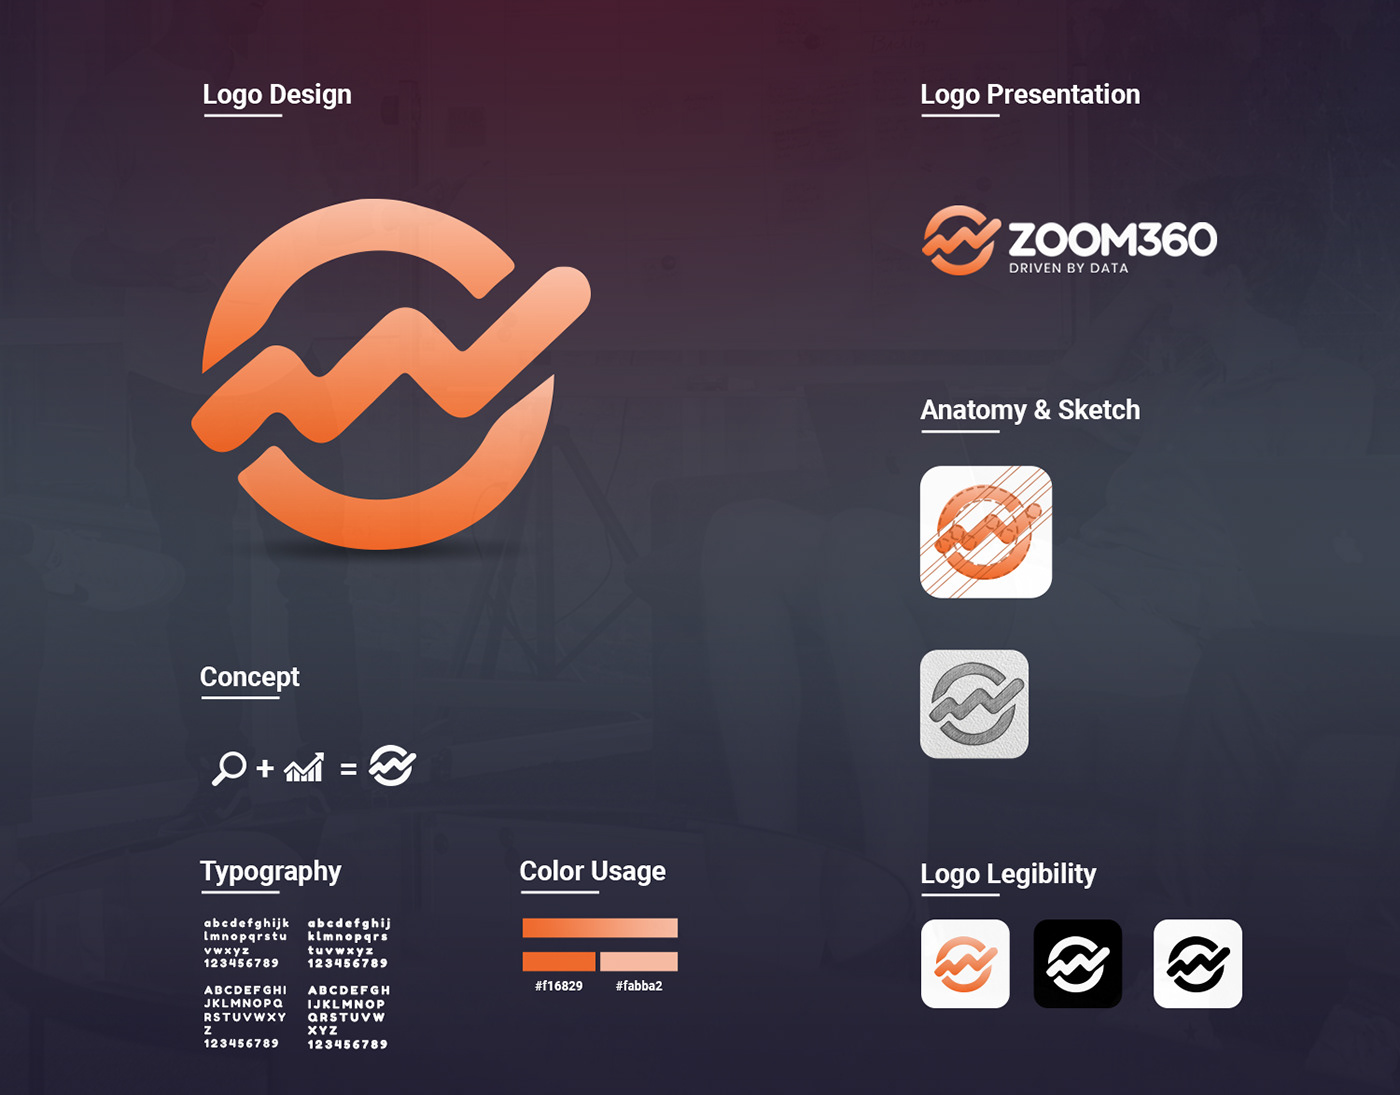 Logo Designed for Data Analytics Solution Zoom360 by Barooq Studios